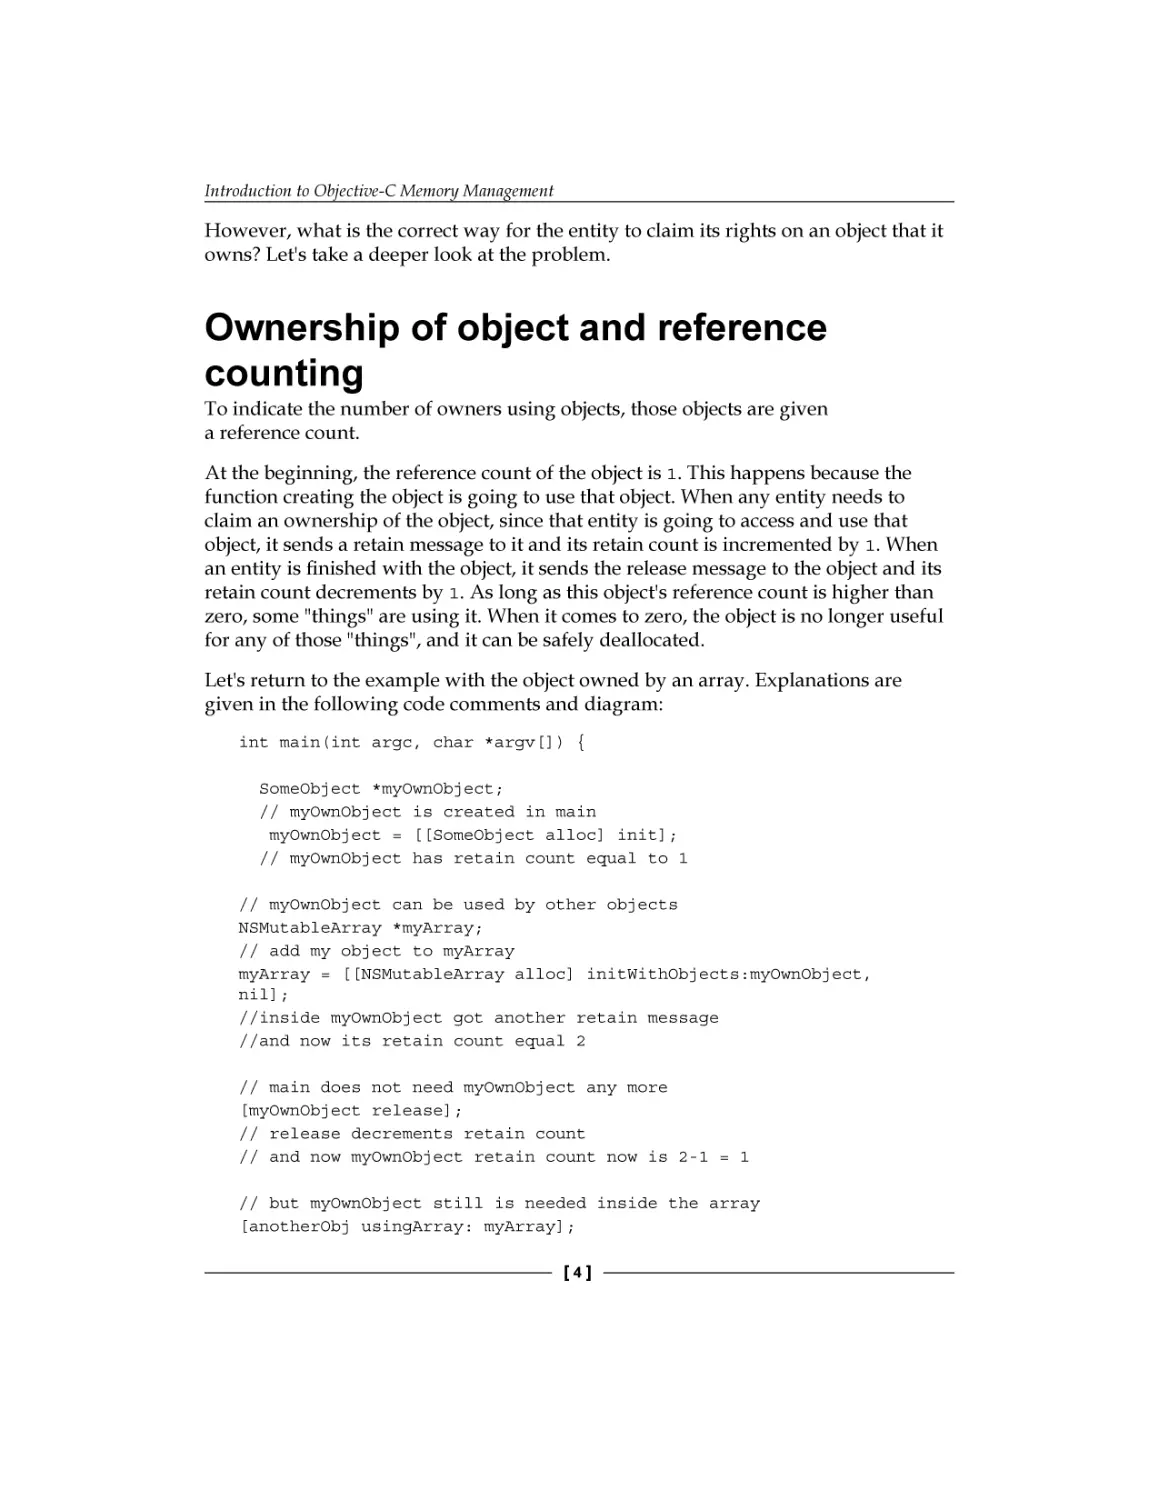 Ownership of object and reference counting